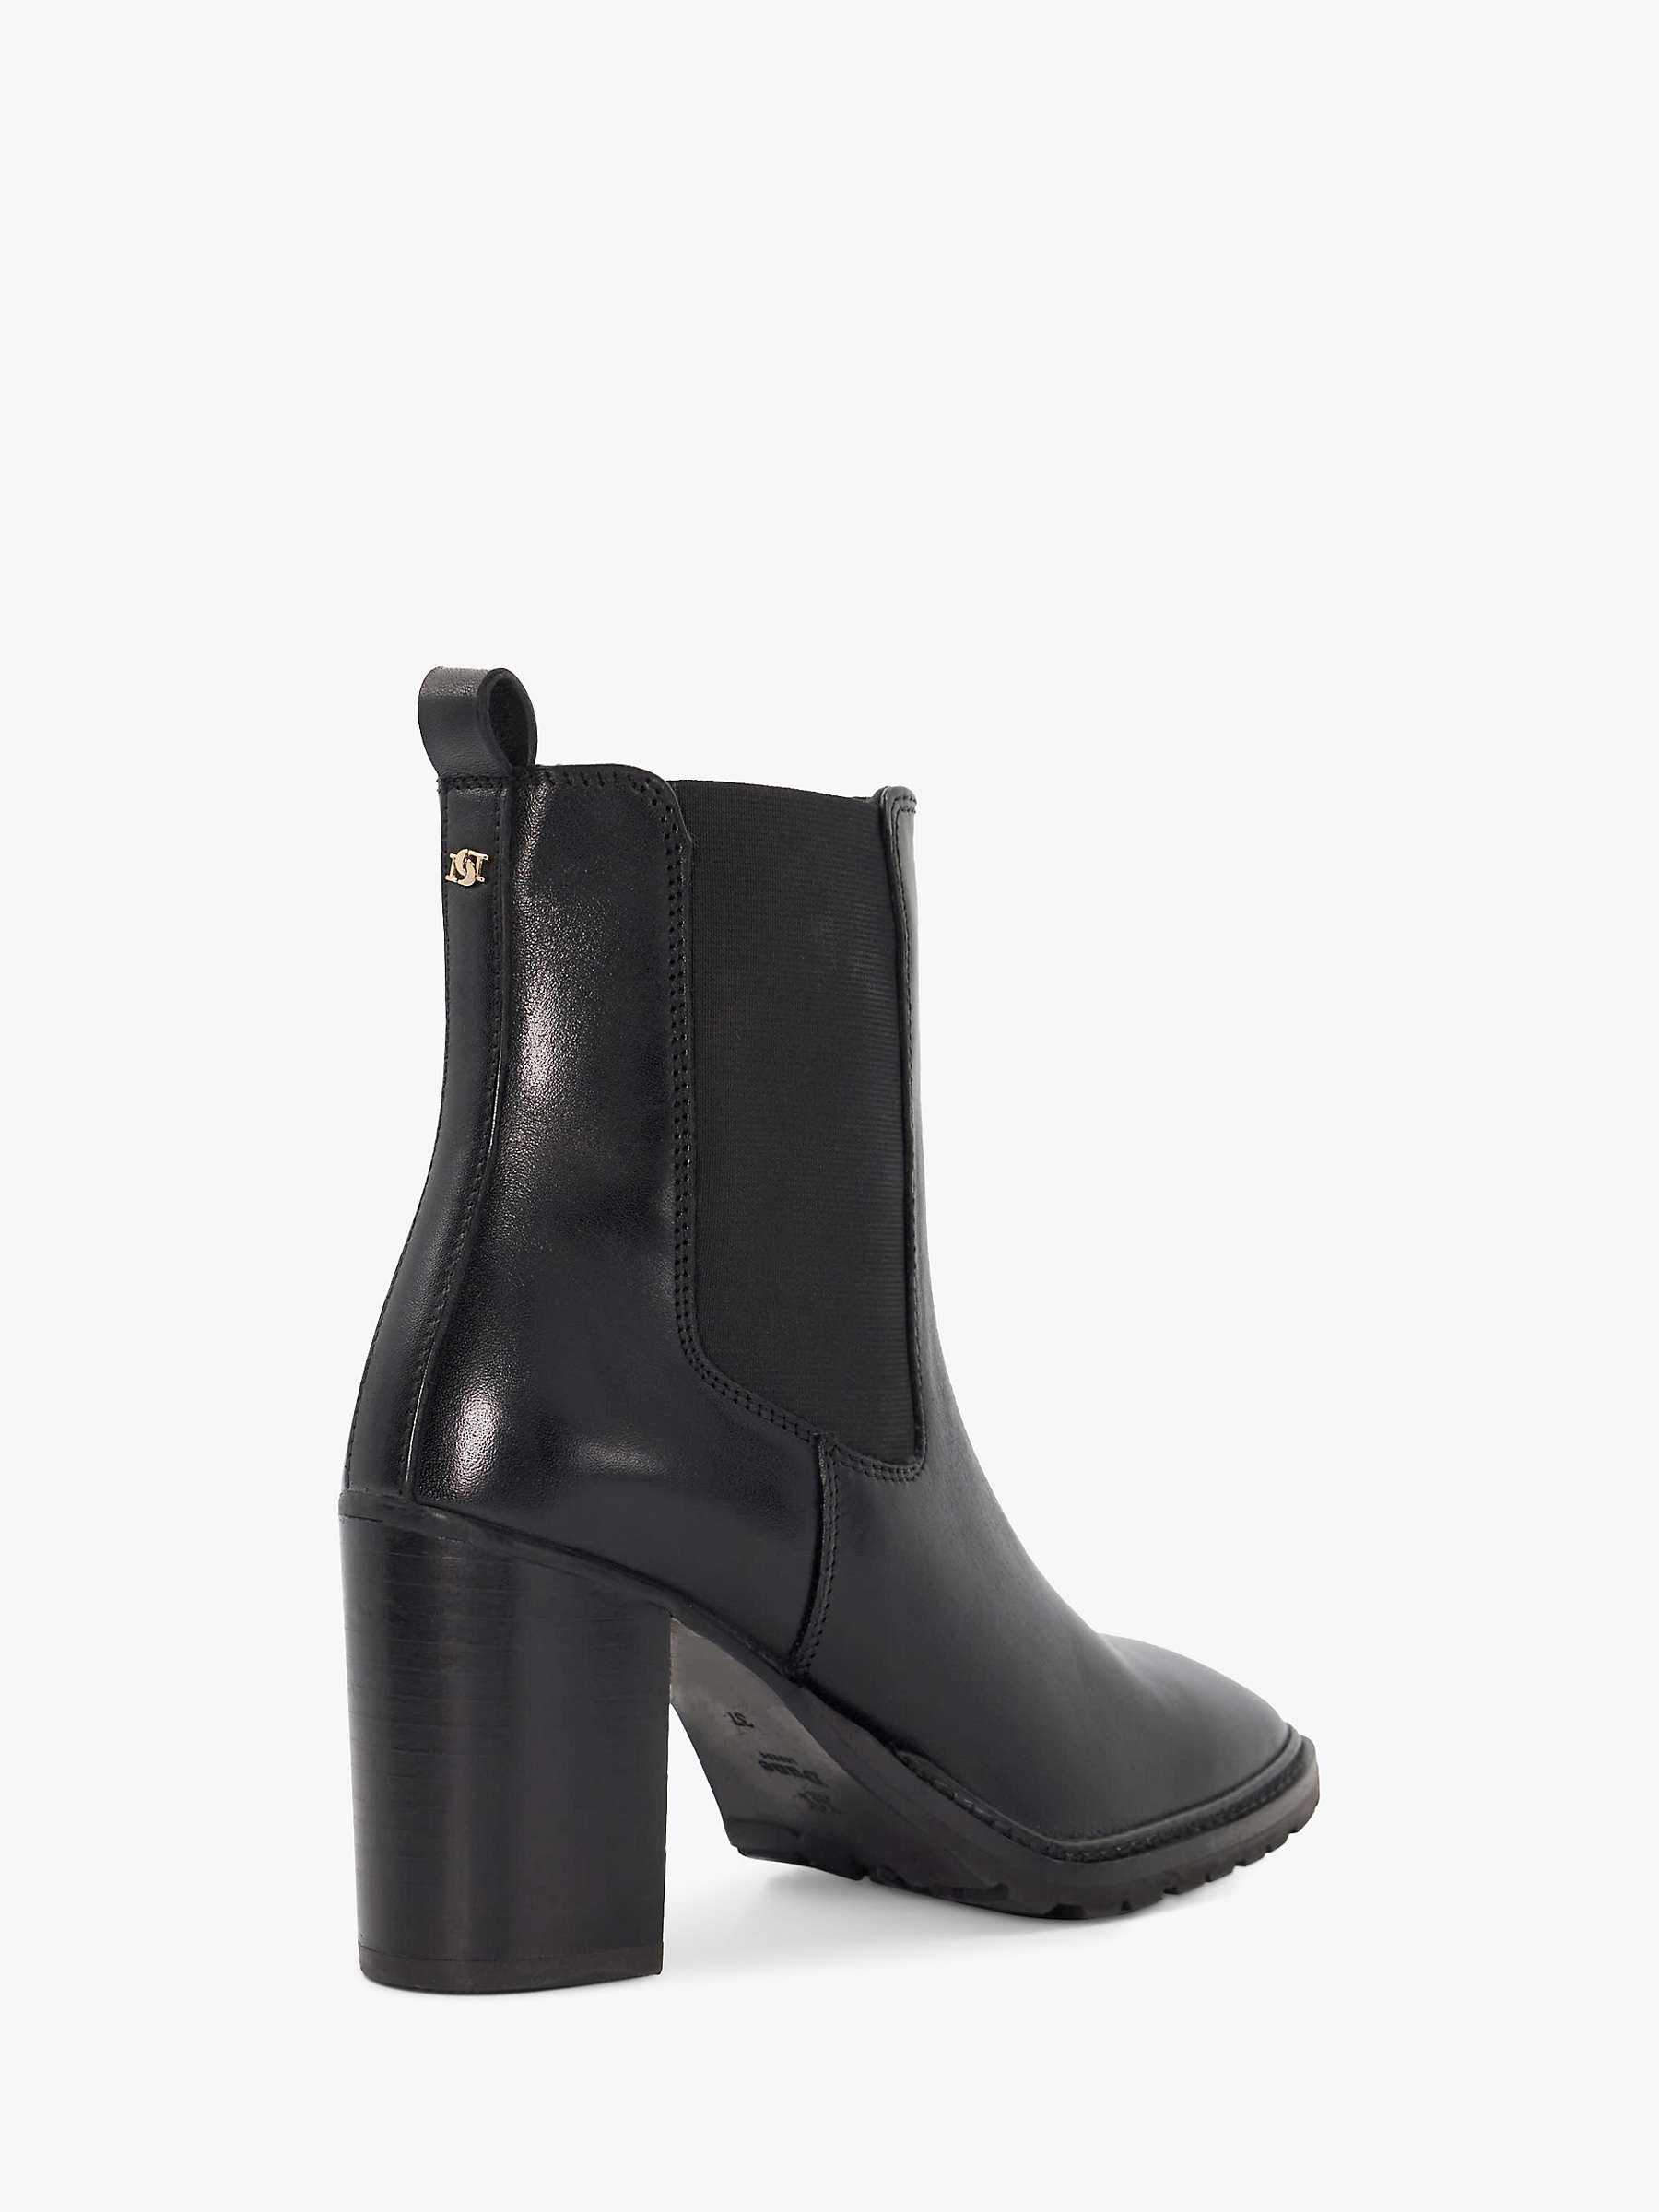 Buy Dune Petition Leather Block Heel Ankle Boots, Black Online at johnlewis.com